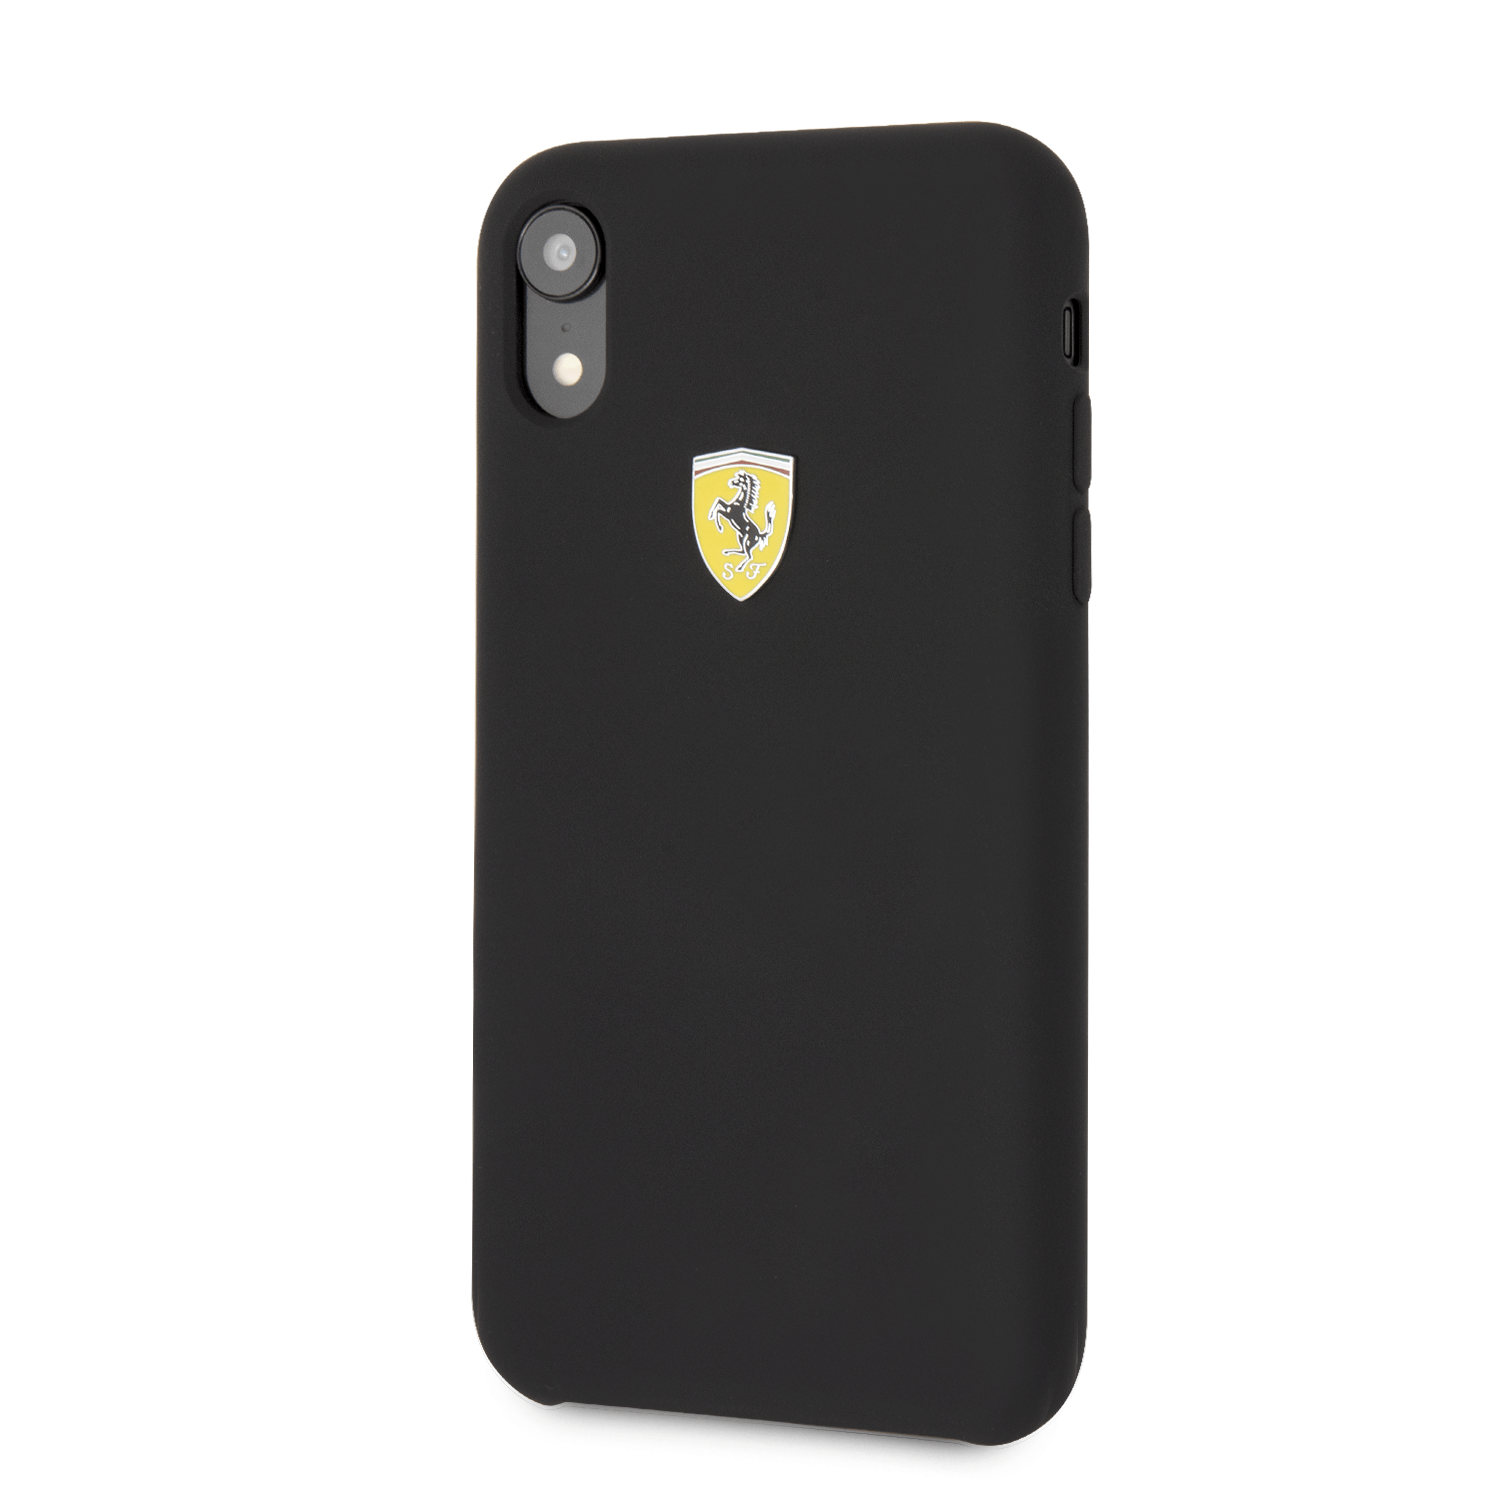 Introducing the Official Ferrari Smooth Silicone Heritage Black Case for iPhone XR, marrying iconic design with reliable protection